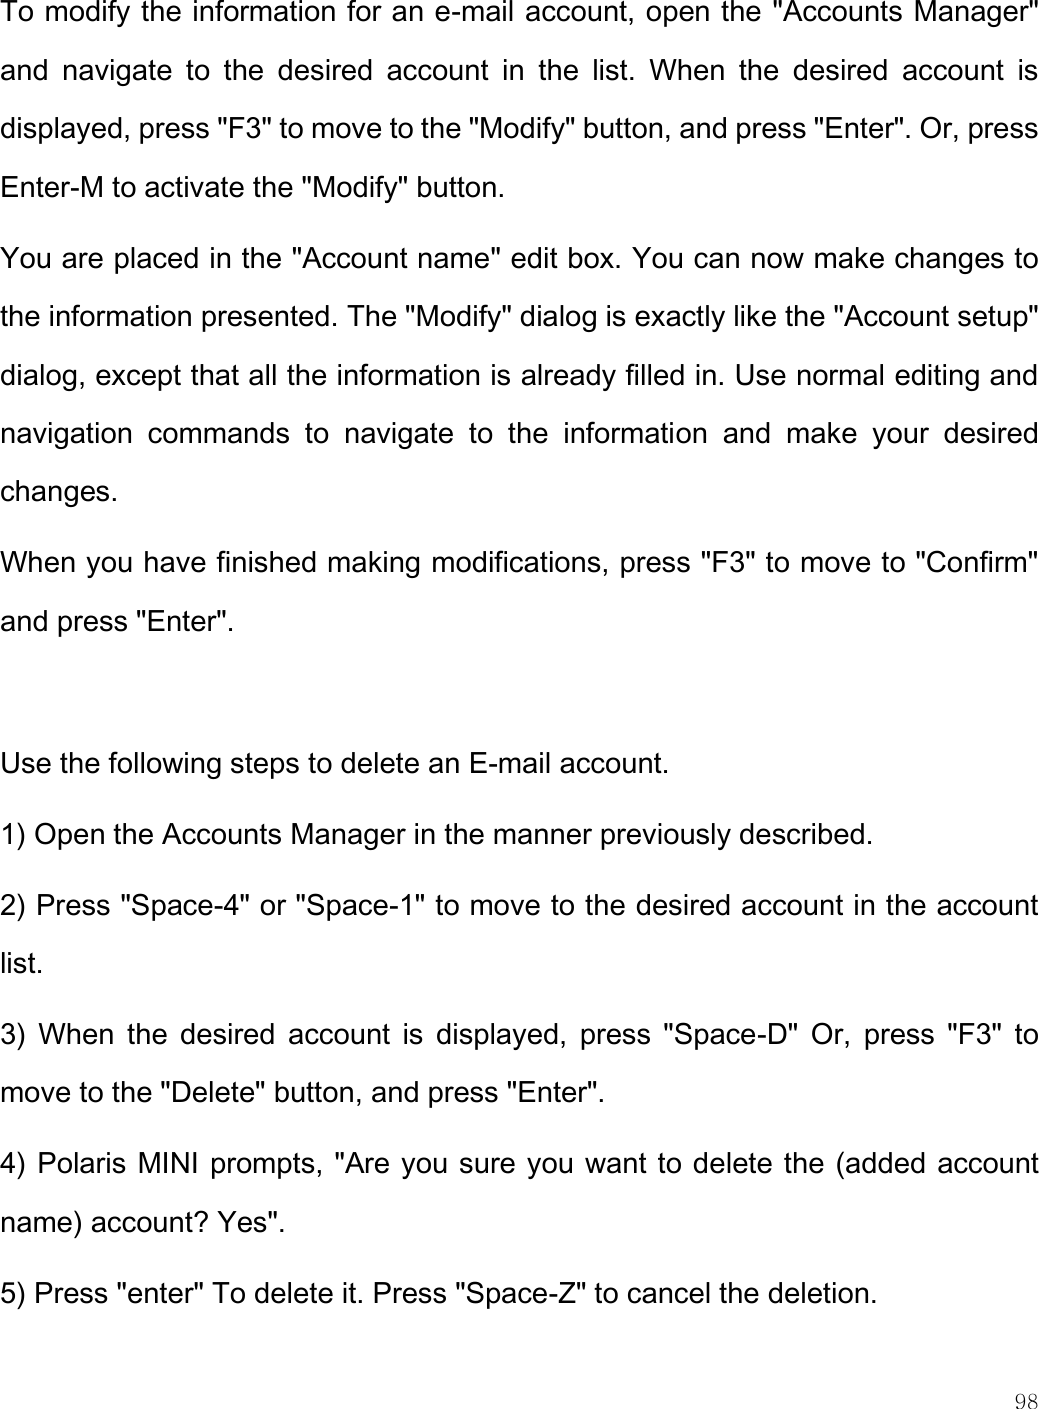    98  To modify the information for an e-mail account, open the &quot;Accounts Manager&quot; and  navigate  to  the  desired  account  in  the  list.  When  the  desired  account  is displayed, press &quot;F3&quot; to move to the &quot;Modify&quot; button, and press &quot;Enter&quot;. Or, press Enter-M to activate the &quot;Modify&quot; button.  You are placed in the &quot;Account name&quot; edit box. You can now make changes to the information presented. The &quot;Modify&quot; dialog is exactly like the &quot;Account setup&quot; dialog, except that all the information is already filled in. Use normal editing and navigation  commands  to  navigate  to  the  information  and  make  your  desired changes.  When you have finished making modifications, press &quot;F3&quot; to move to &quot;Confirm&quot; and press &quot;Enter&quot;.   Use the following steps to delete an E-mail account. 1) Open the Accounts Manager in the manner previously described. 2) Press &quot;Space-4&quot; or &quot;Space-1&quot; to move to the desired account in the account list. 3)  When the  desired  account  is  displayed,  press  &quot;Space-D&quot;  Or,  press  &quot;F3&quot;  to move to the &quot;Delete&quot; button, and press &quot;Enter&quot;. 4) Polaris MINI prompts, &quot;Are you sure you want to delete the (added account name) account? Yes&quot;.  5) Press &quot;enter&quot; To delete it. Press &quot;Space-Z&quot; to cancel the deletion.  